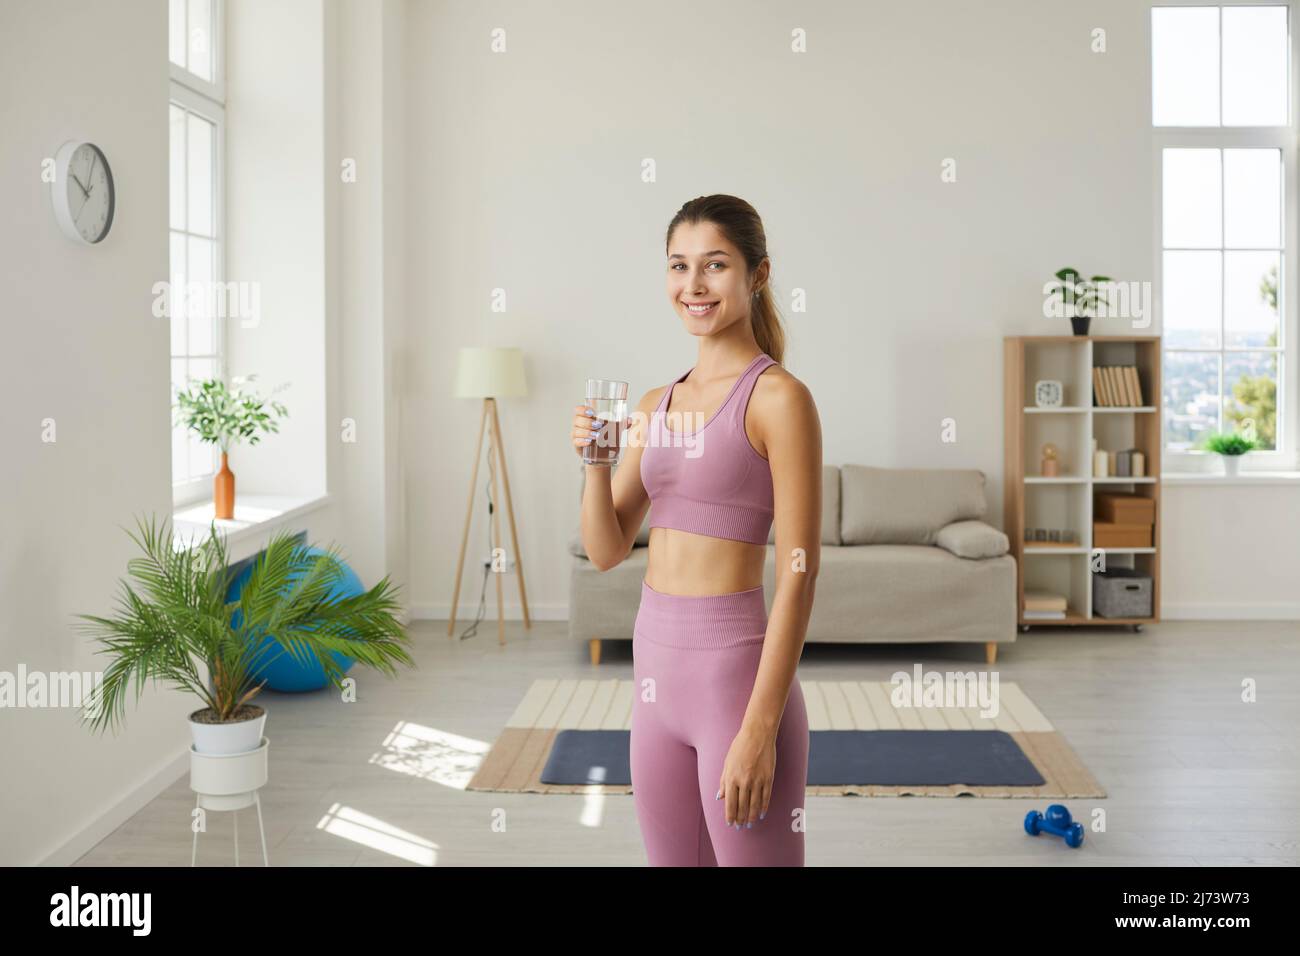 Lifestyle portrait of slender young fitness woman holding glass of water standing in living room. Stock Photo